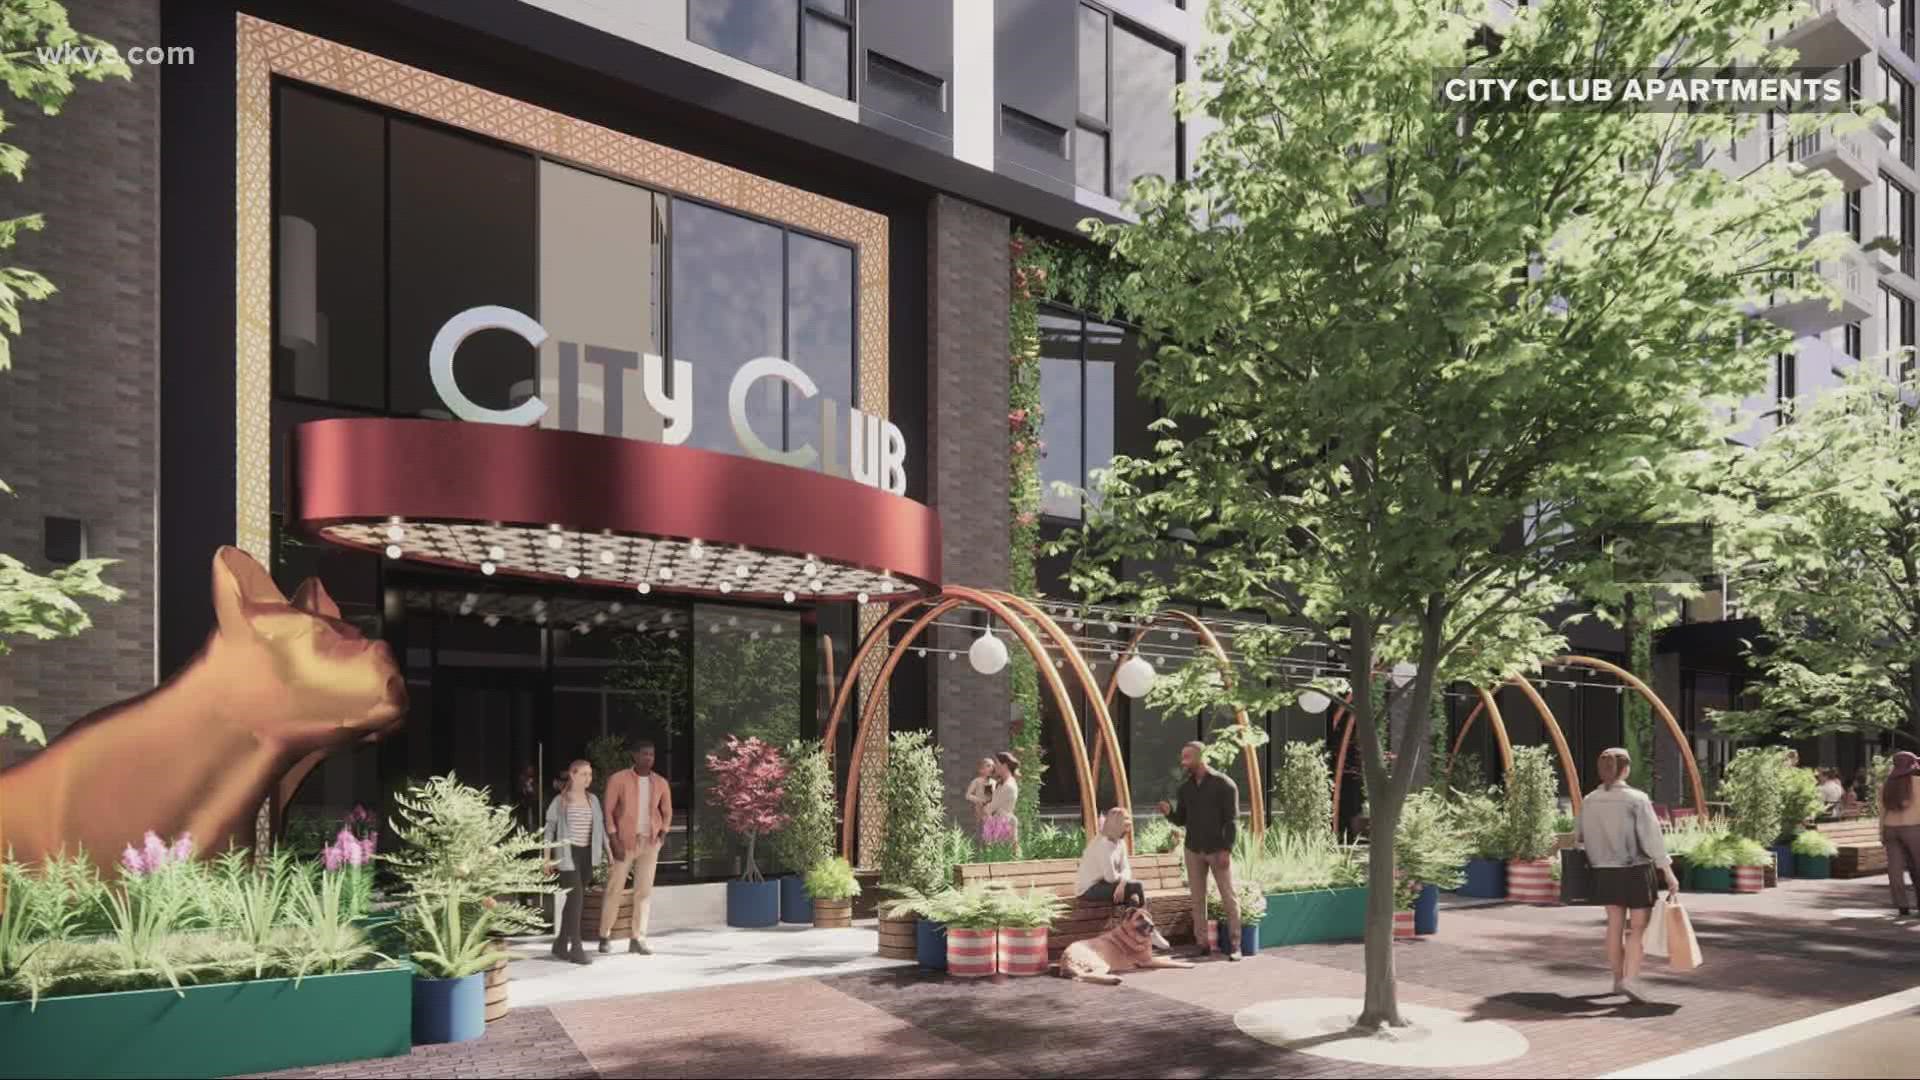 Construction is kicking off at the site of a new 23-story mixed-use building in downtown Cleveland. City Club Apartments held a groundbreaking ceremony Friday.